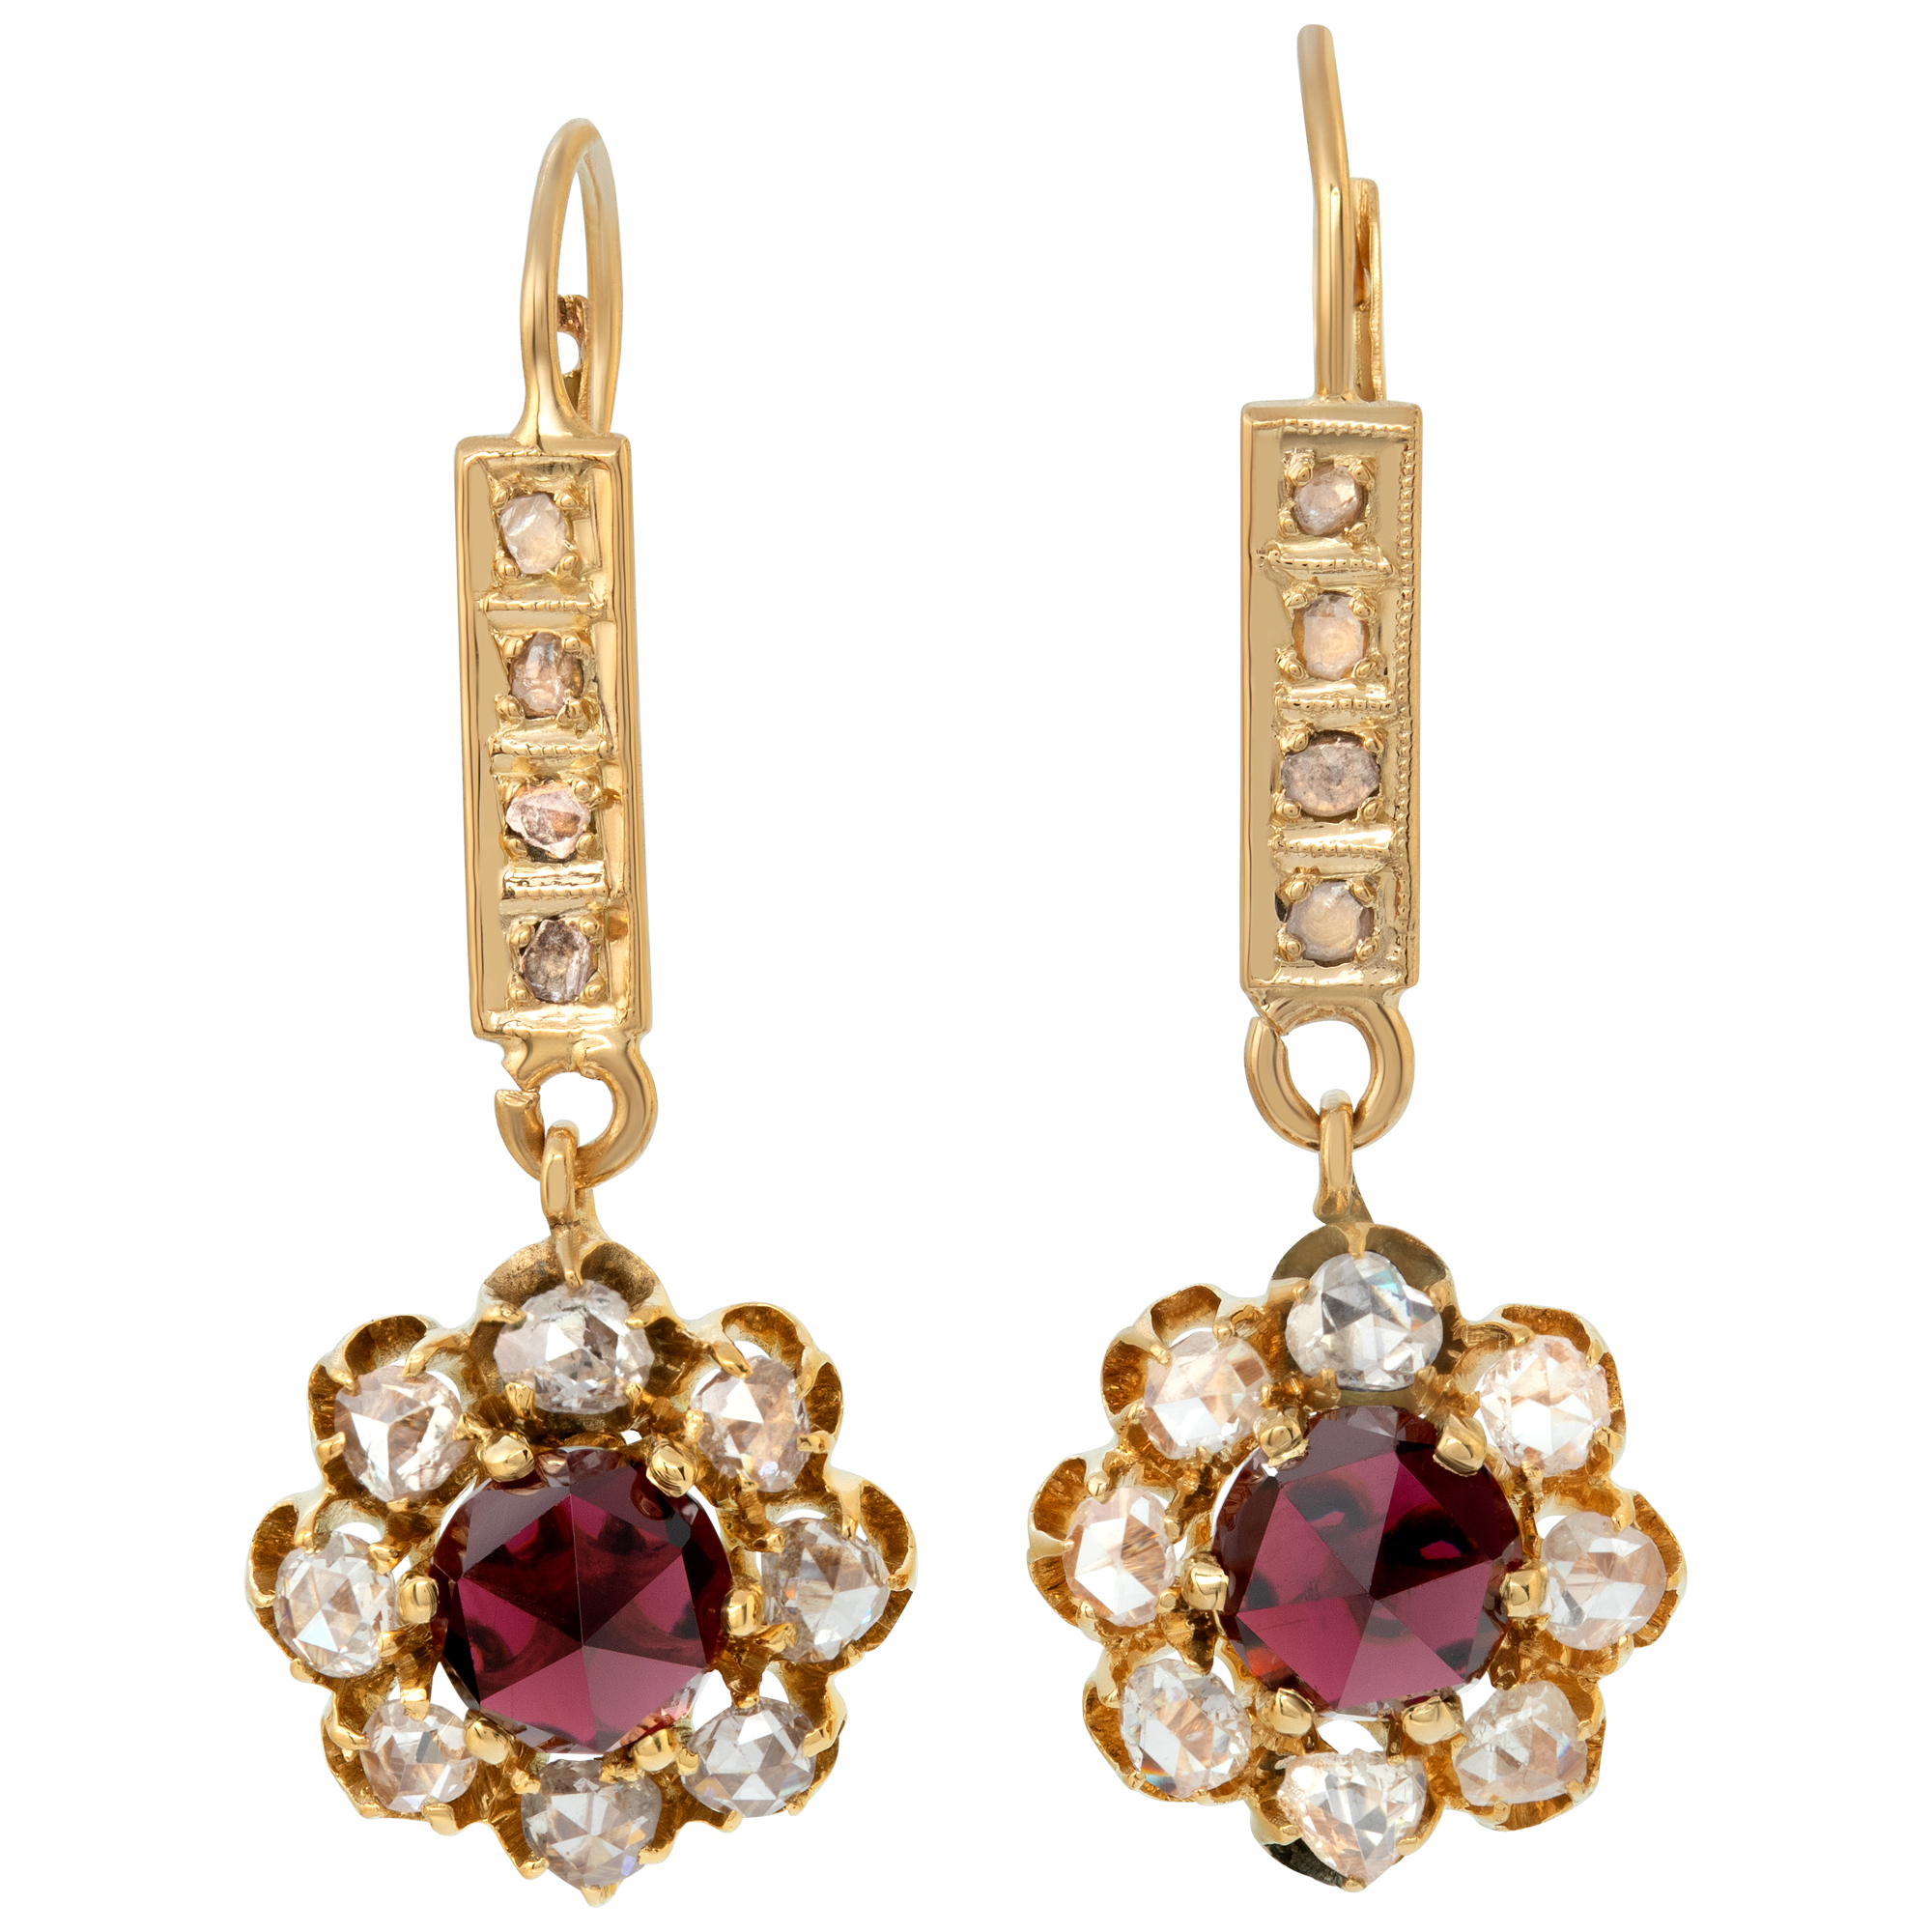 Pretty 14k yellow gold floral briolette rose cut diamond earrings with approximately 2 carats